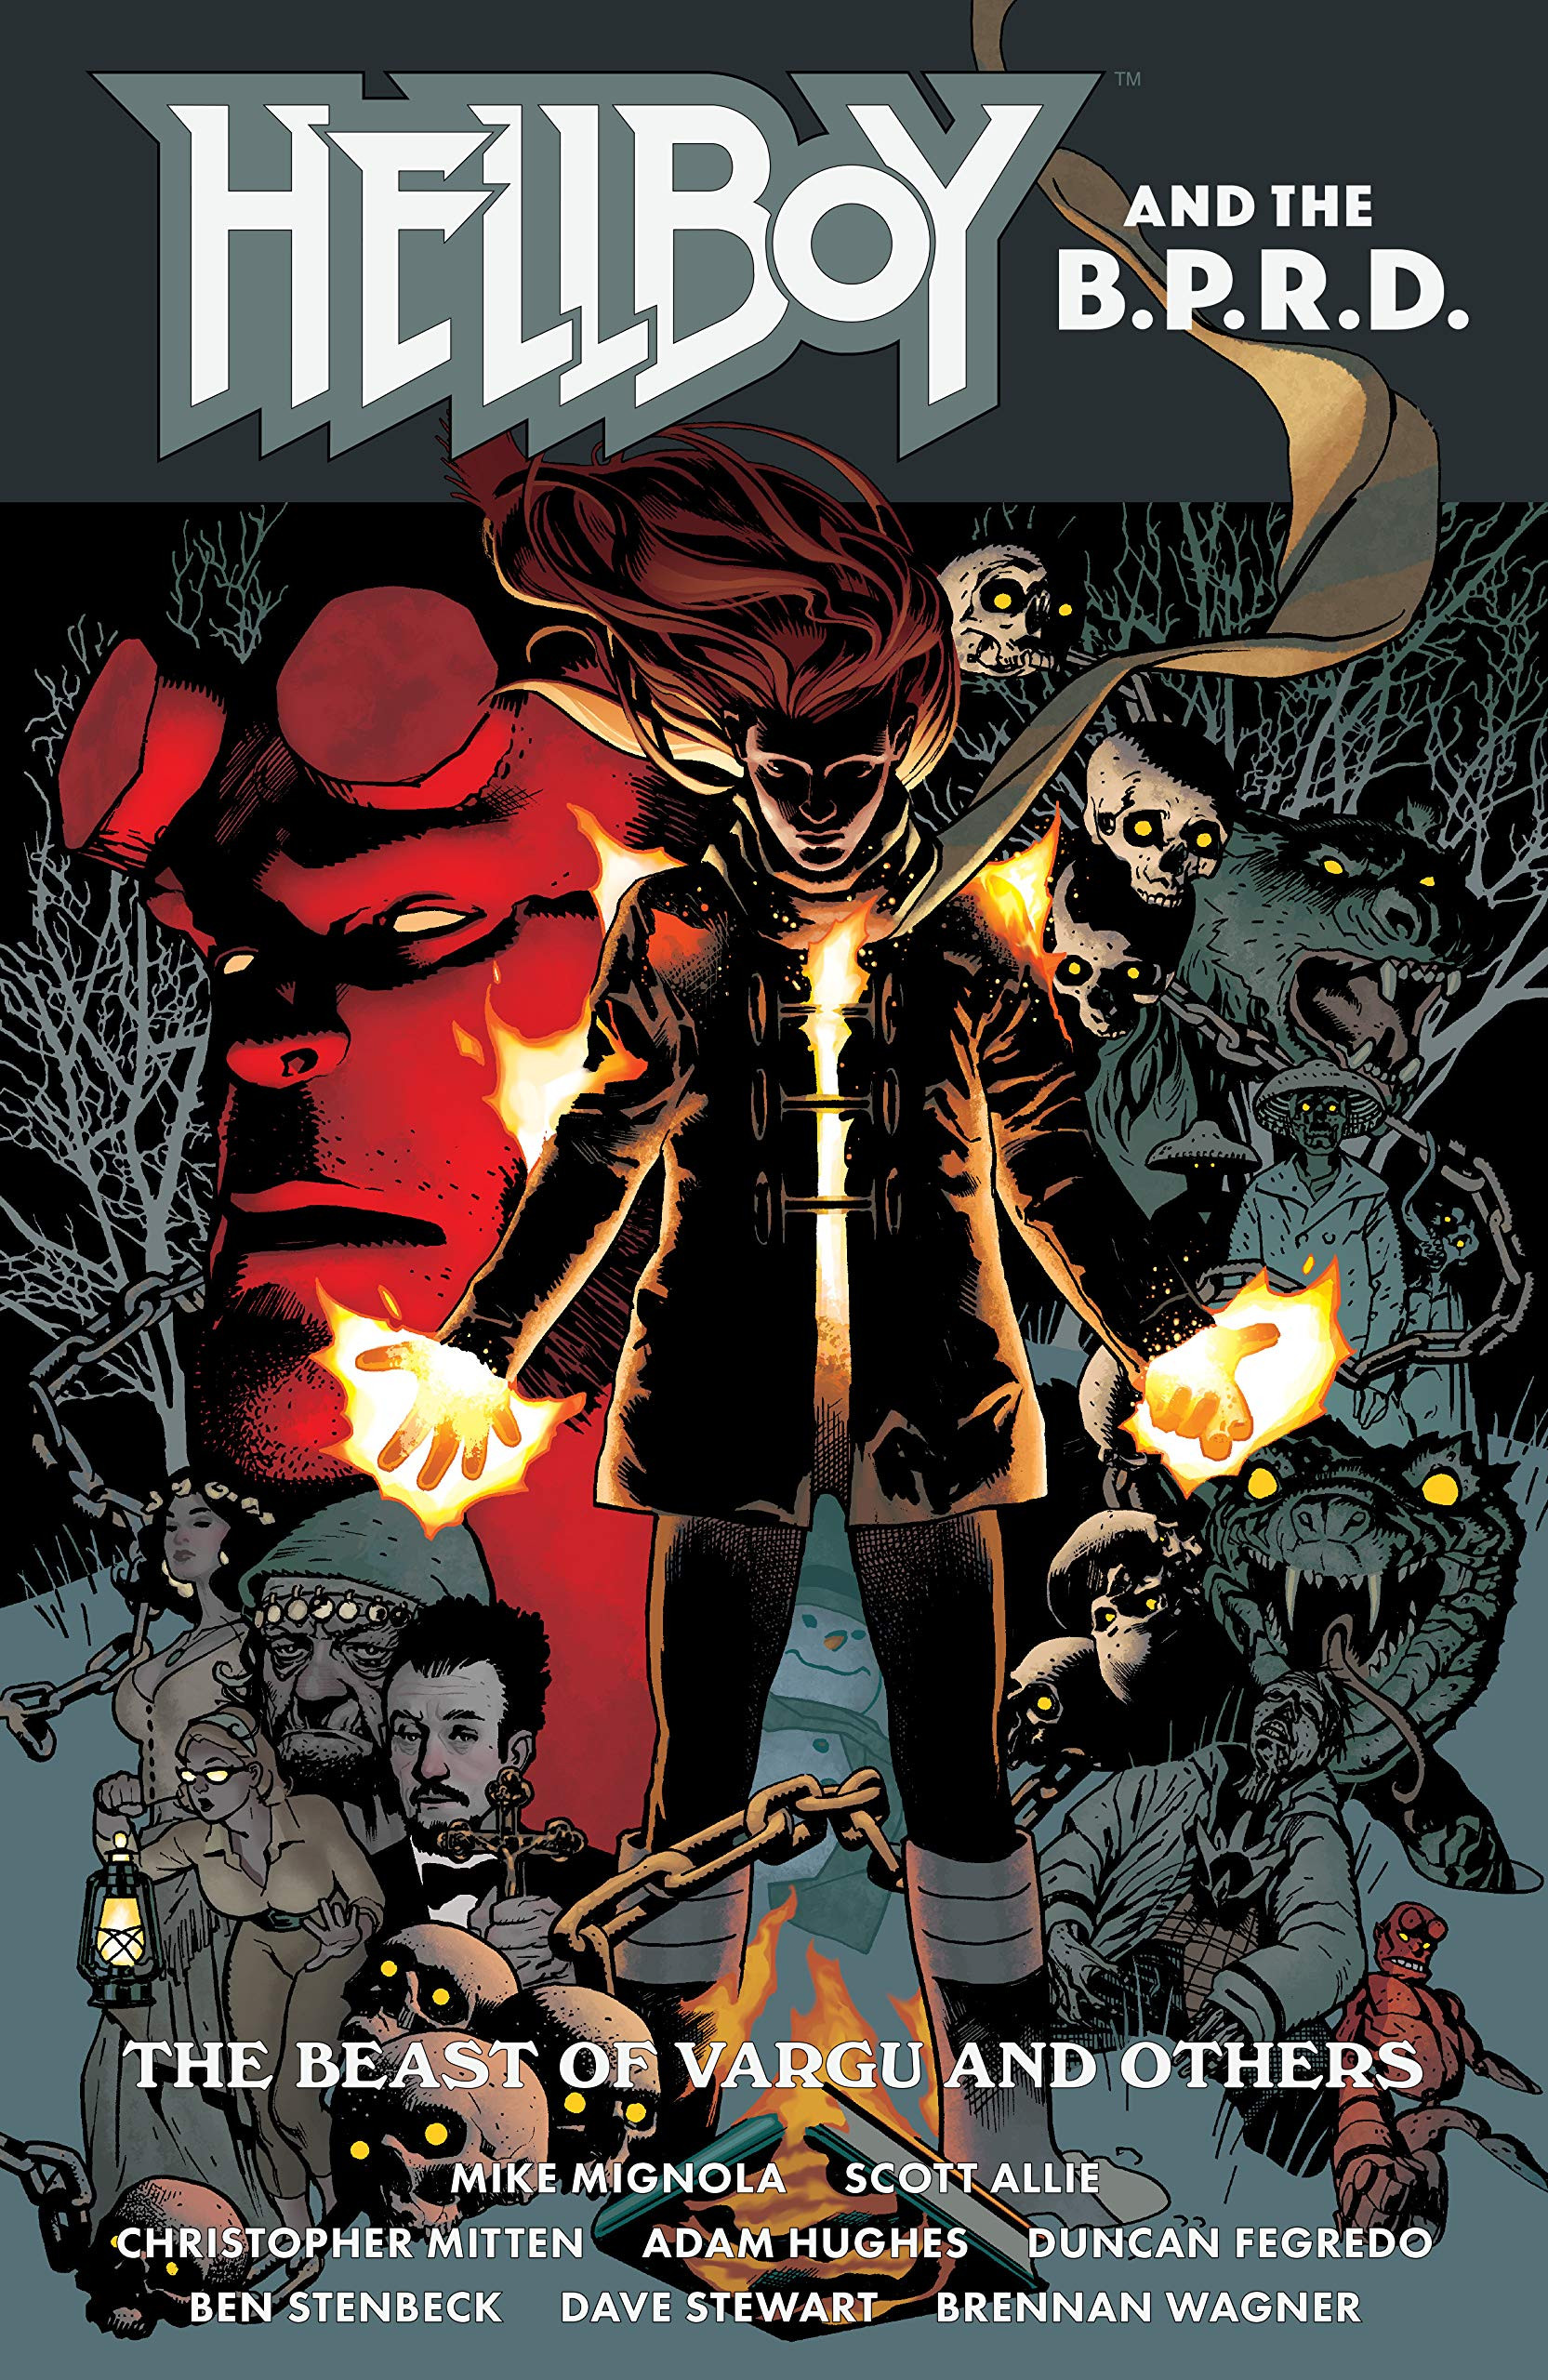 Hellboy and the B.P.R.D. - The Beast of Vargu and Others